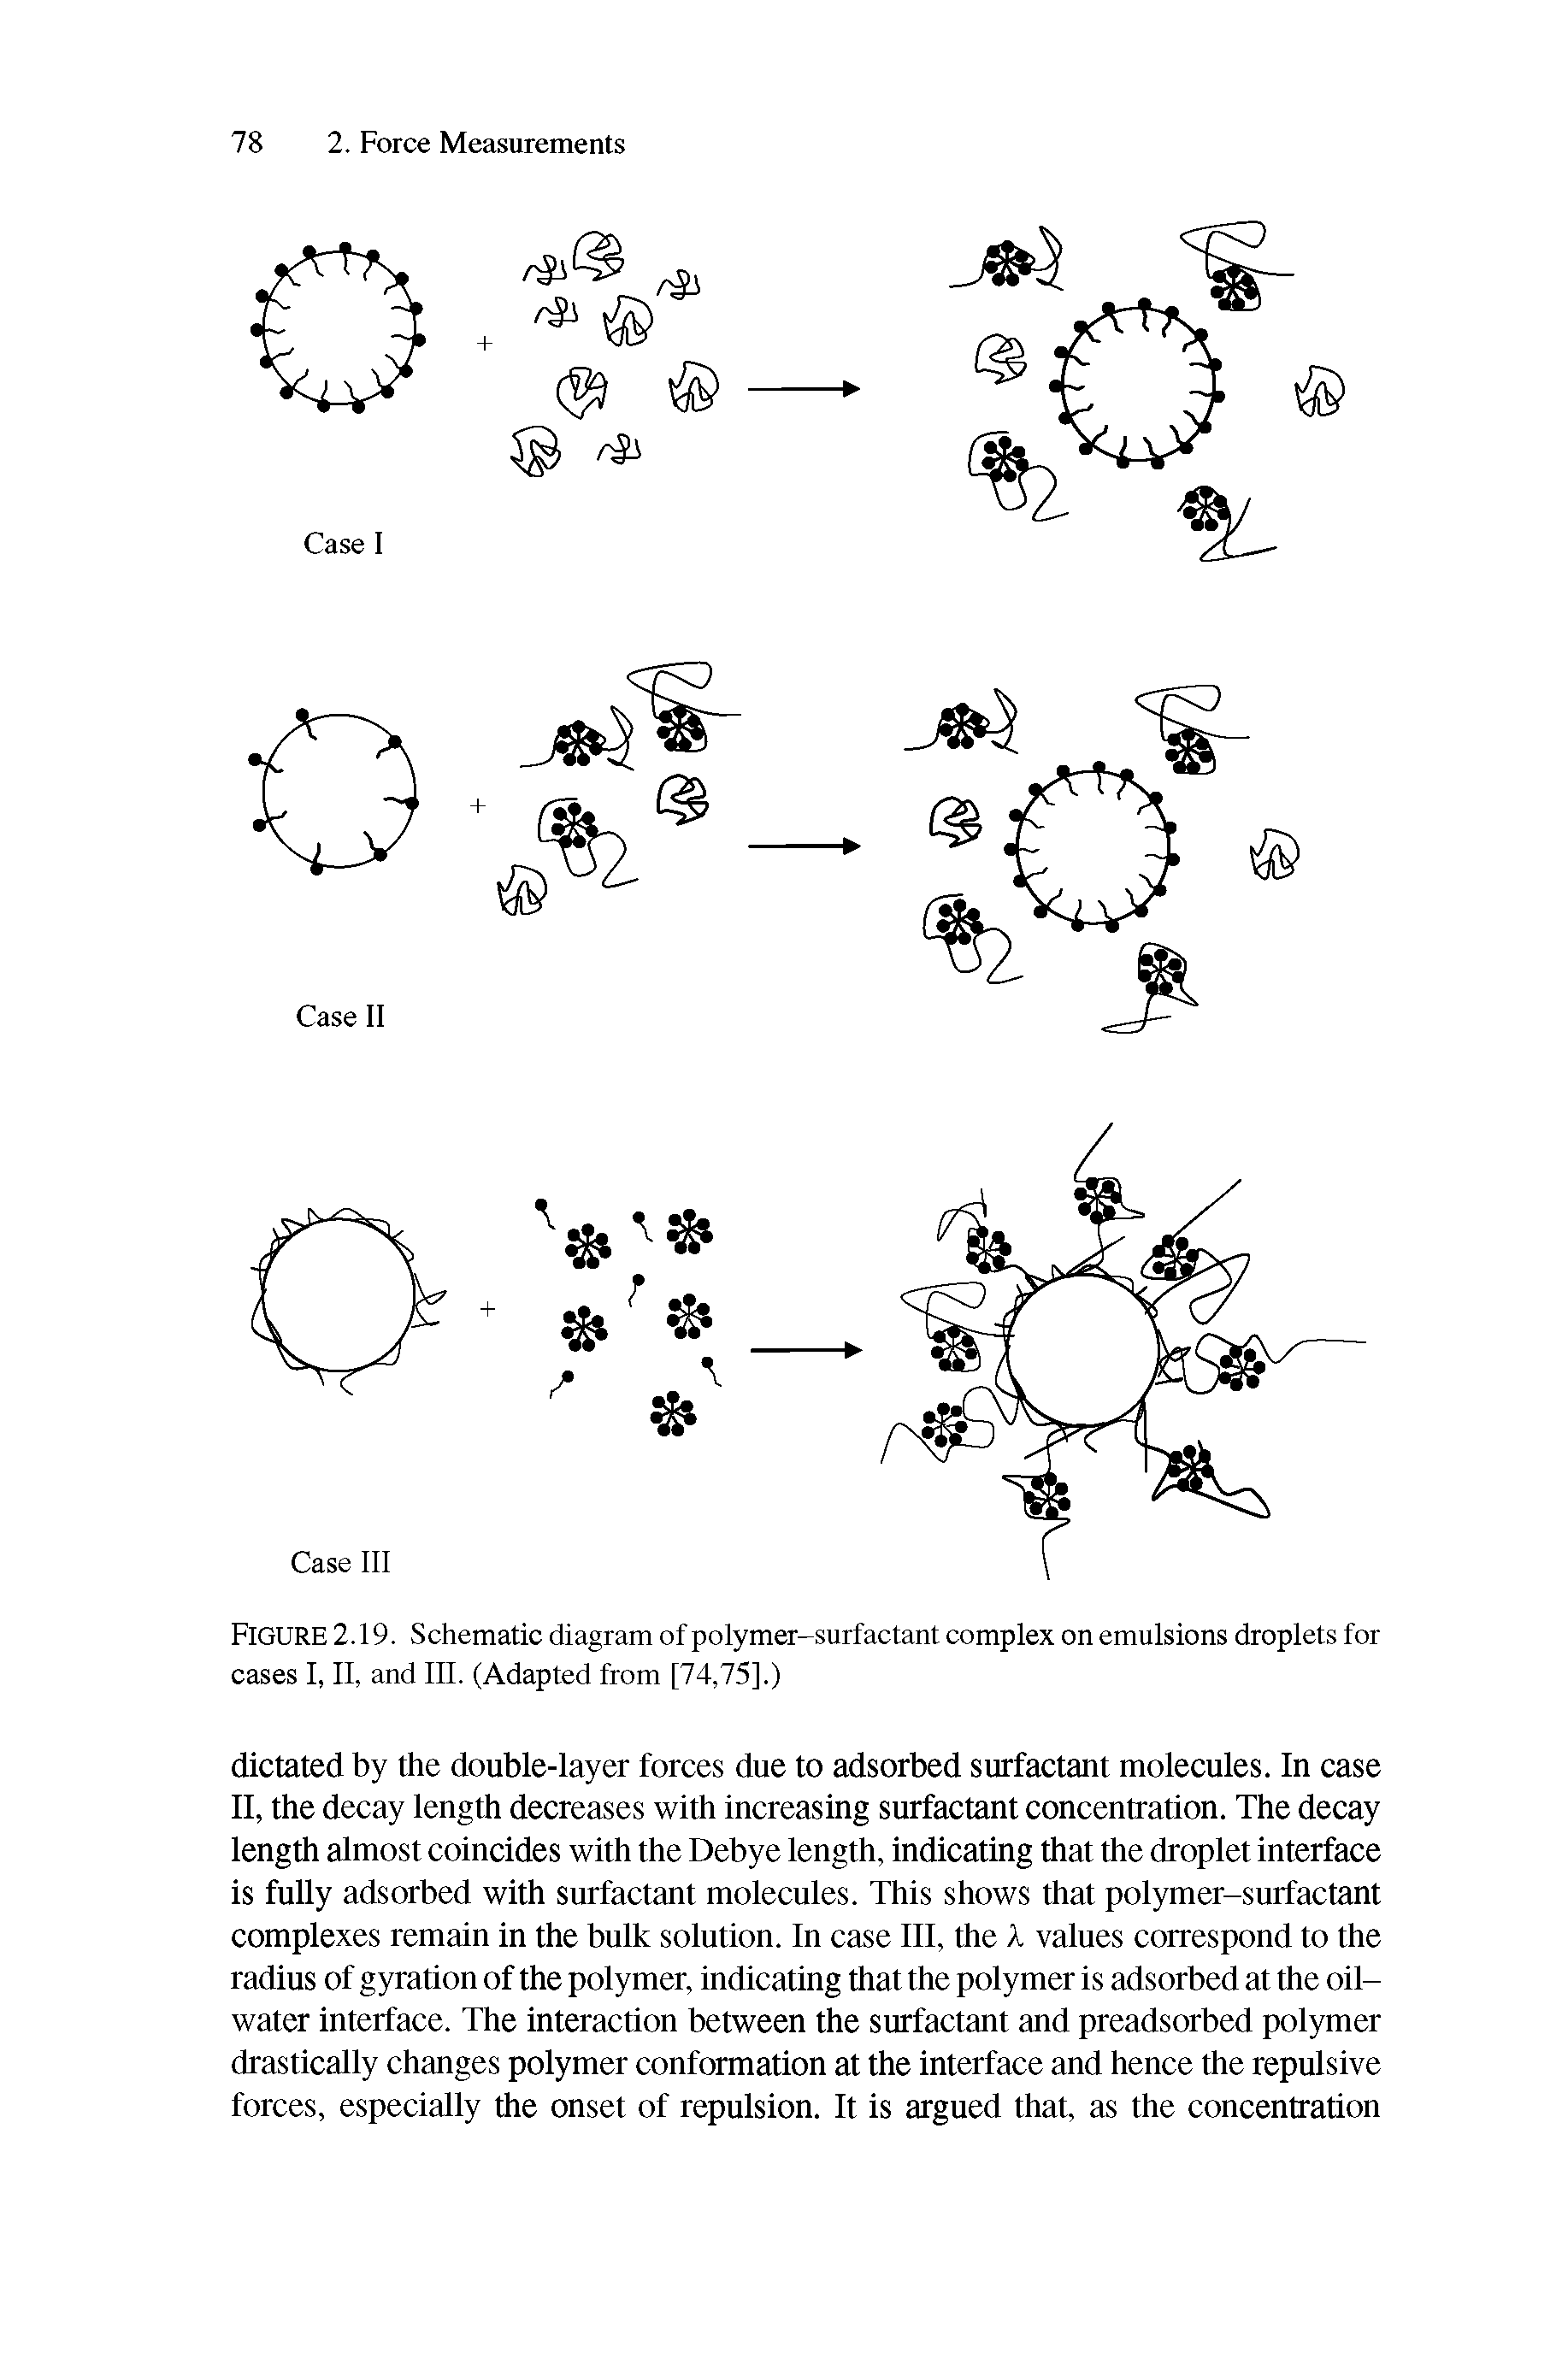 Figure 2.19. Schematic diagram of polymer-surfactant complex on emulsions droplets for cases I, II, and III. (Adapted from [74,75].)...